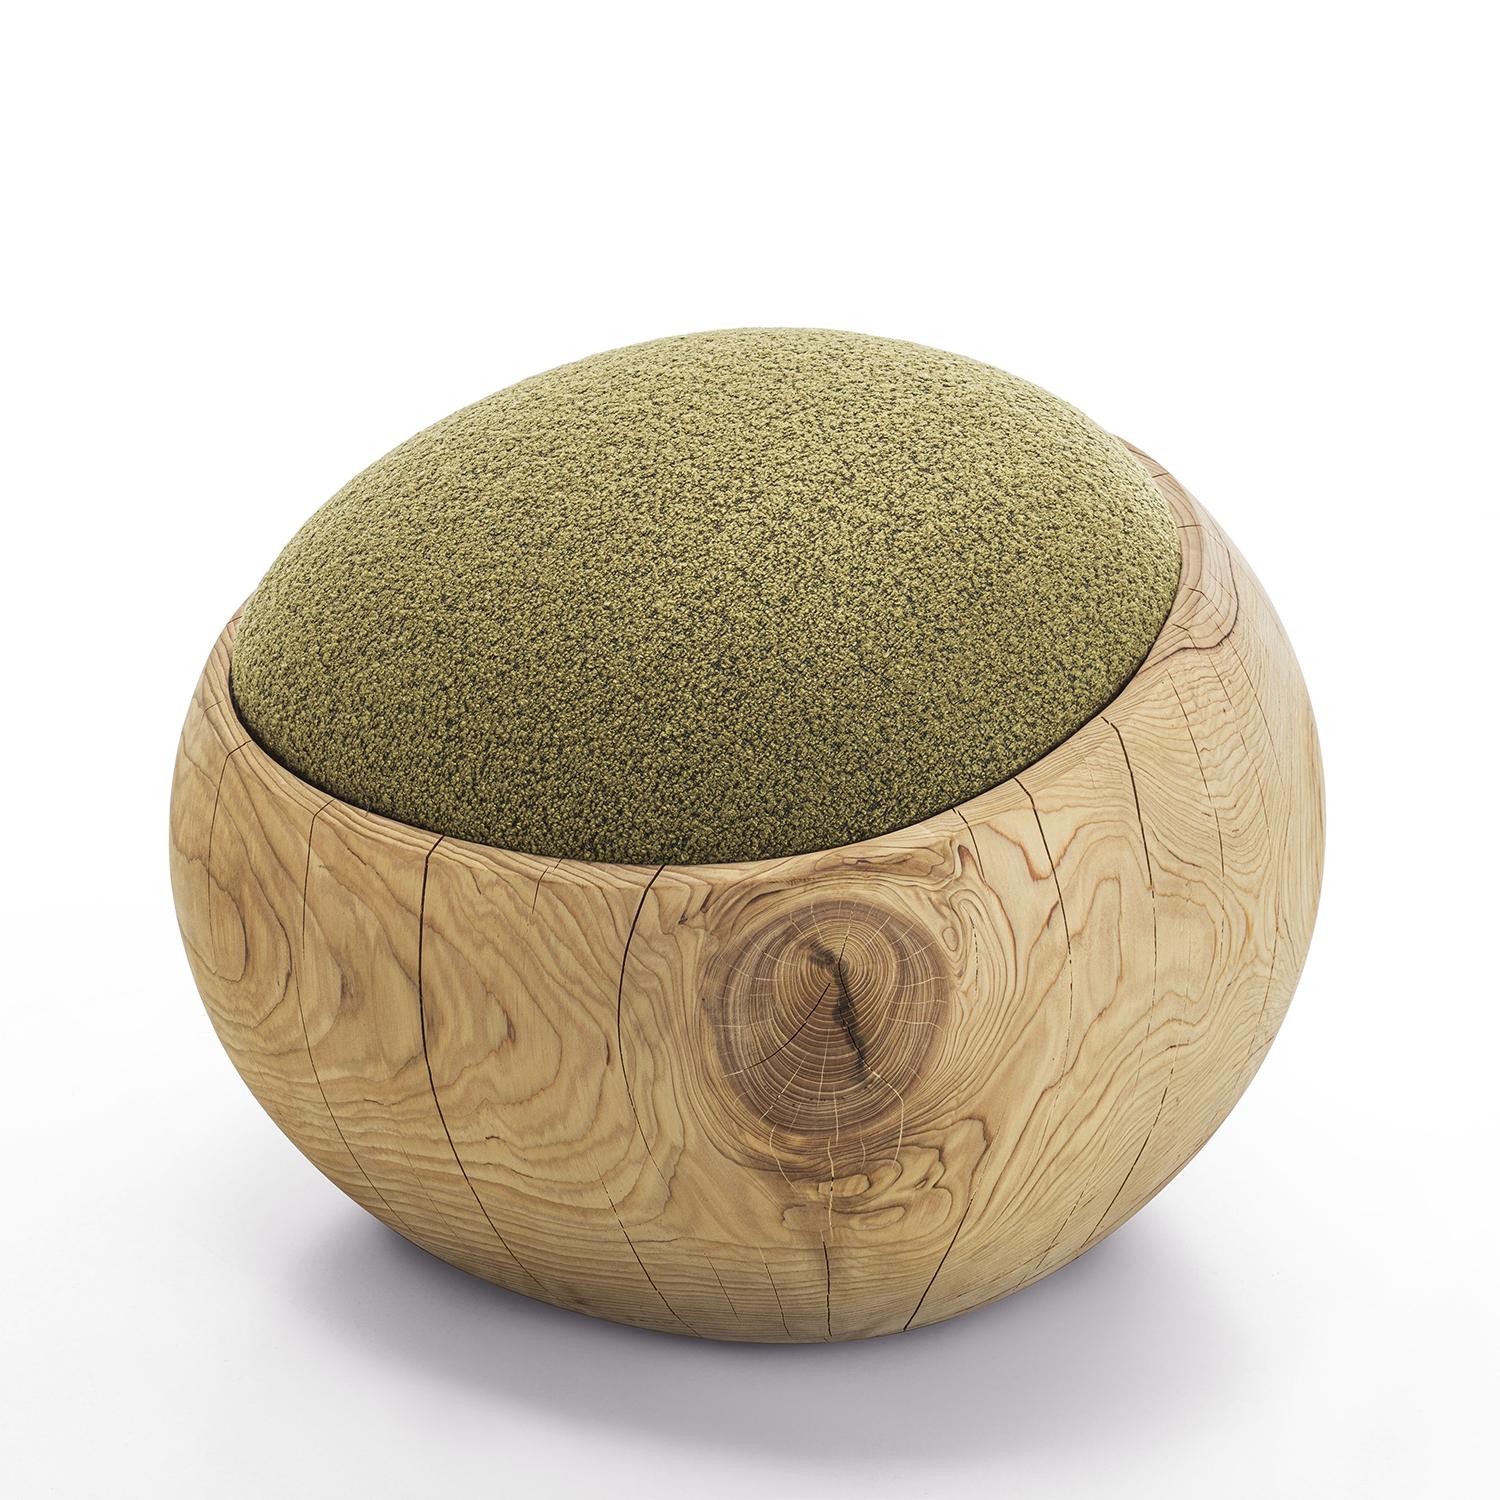 Stool Bud Kaki Cedar with structure in solid cedar wood,
wood treated with wax with natural pine extracts, stool
upholstered and covered with bouclé fabric in kaki color.
Also available on request with bouclé fabric in white color
or in brown